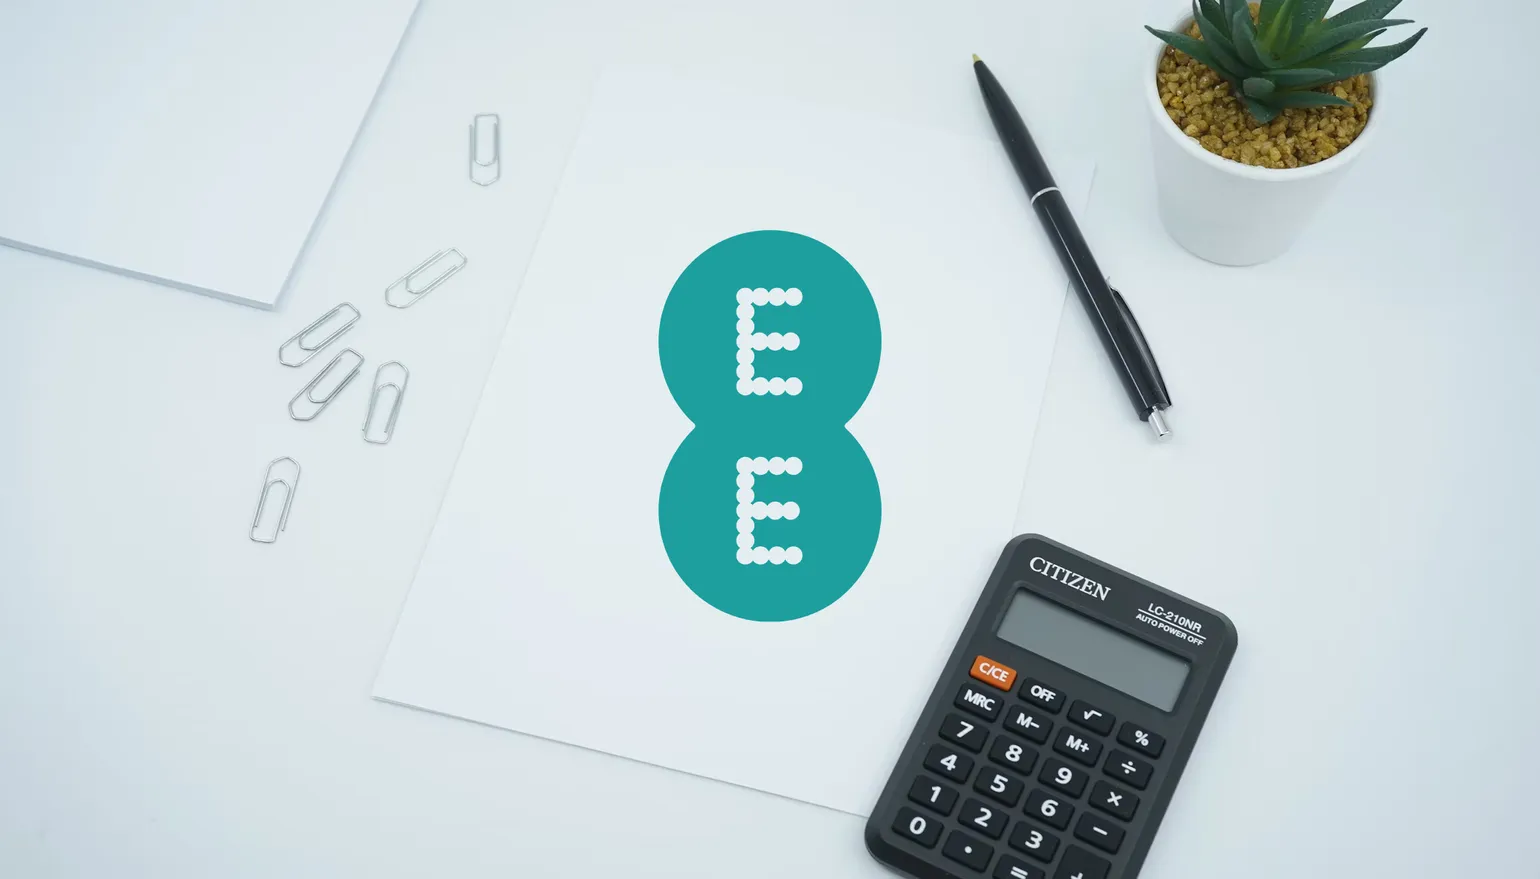 EE to increase mobile contracts by £1.50 per month, abandoning inflation based rises